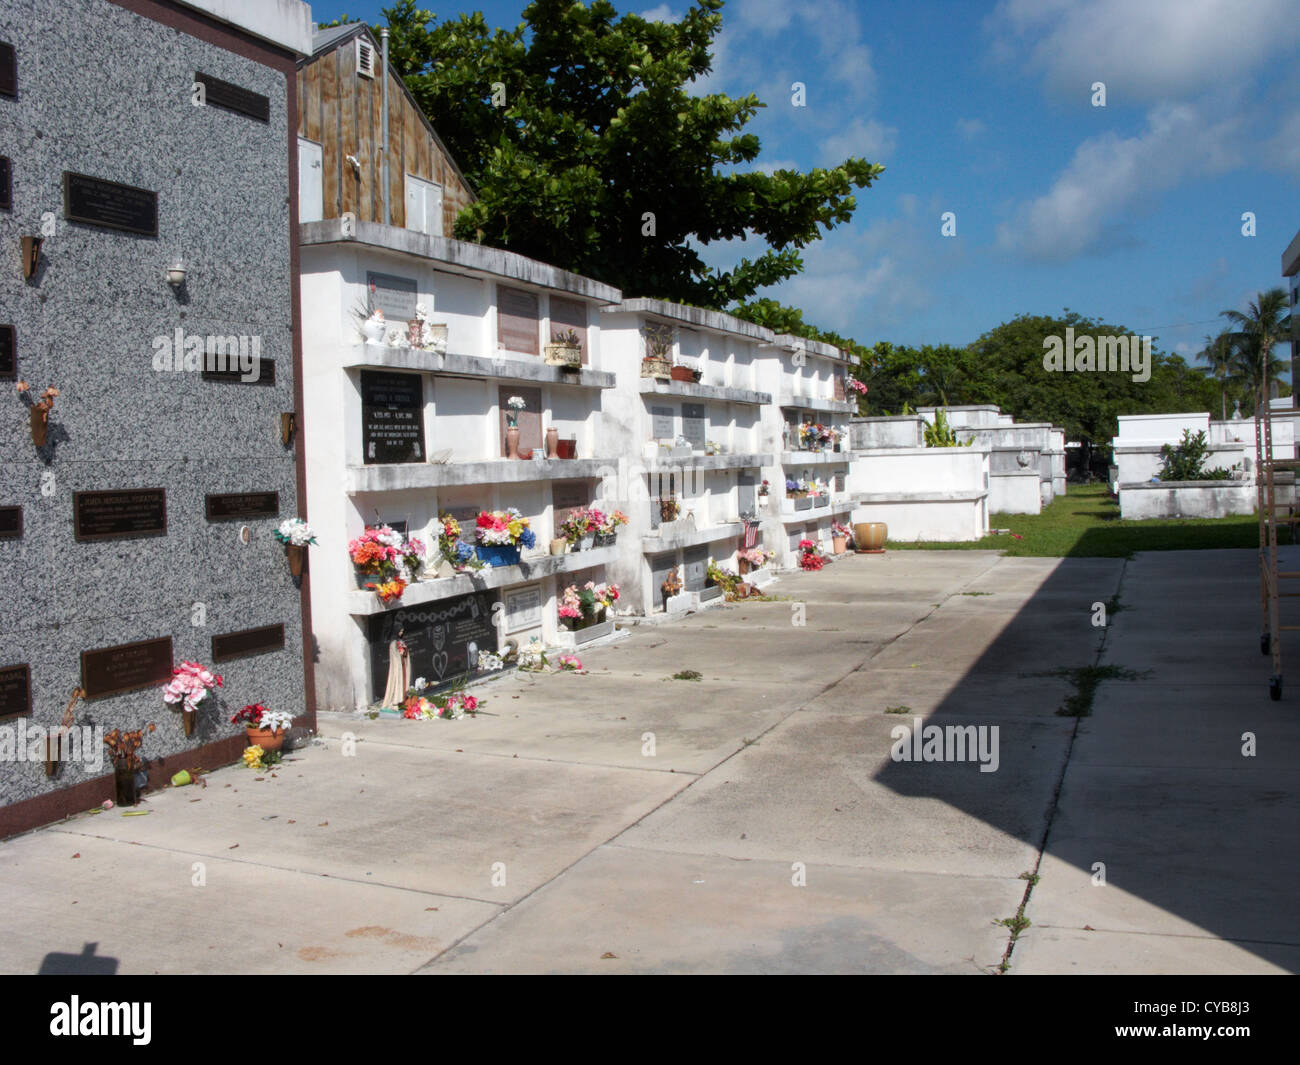 above ground tombs in key west cemetery florida usa Stock Photo